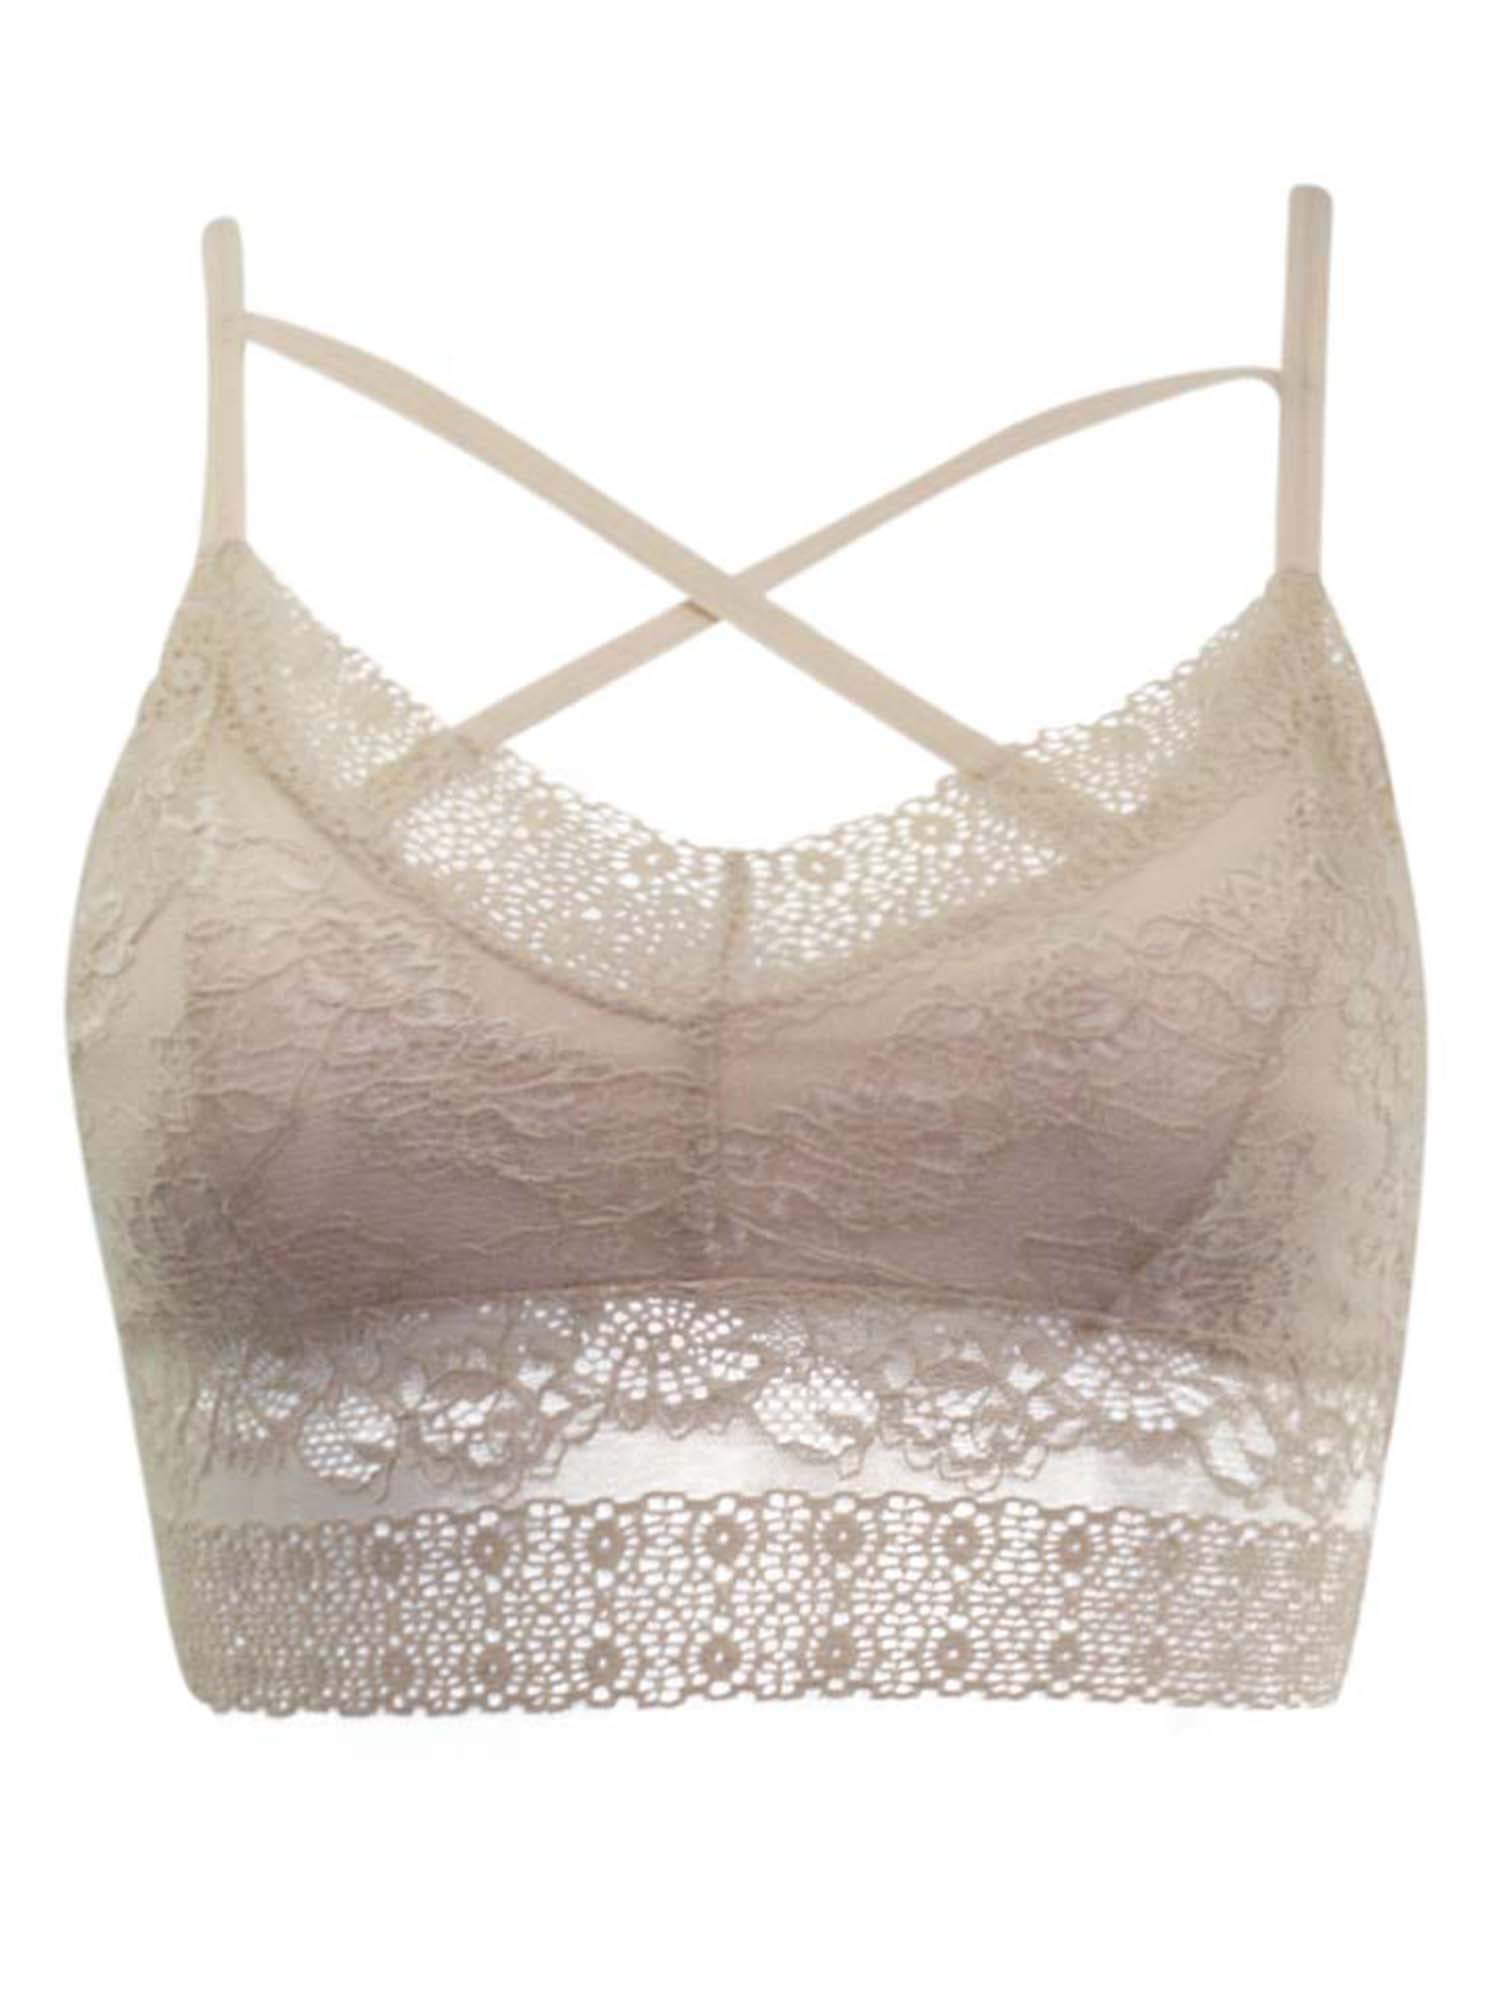 Beige Lace Bralette With Front Detail Size Small